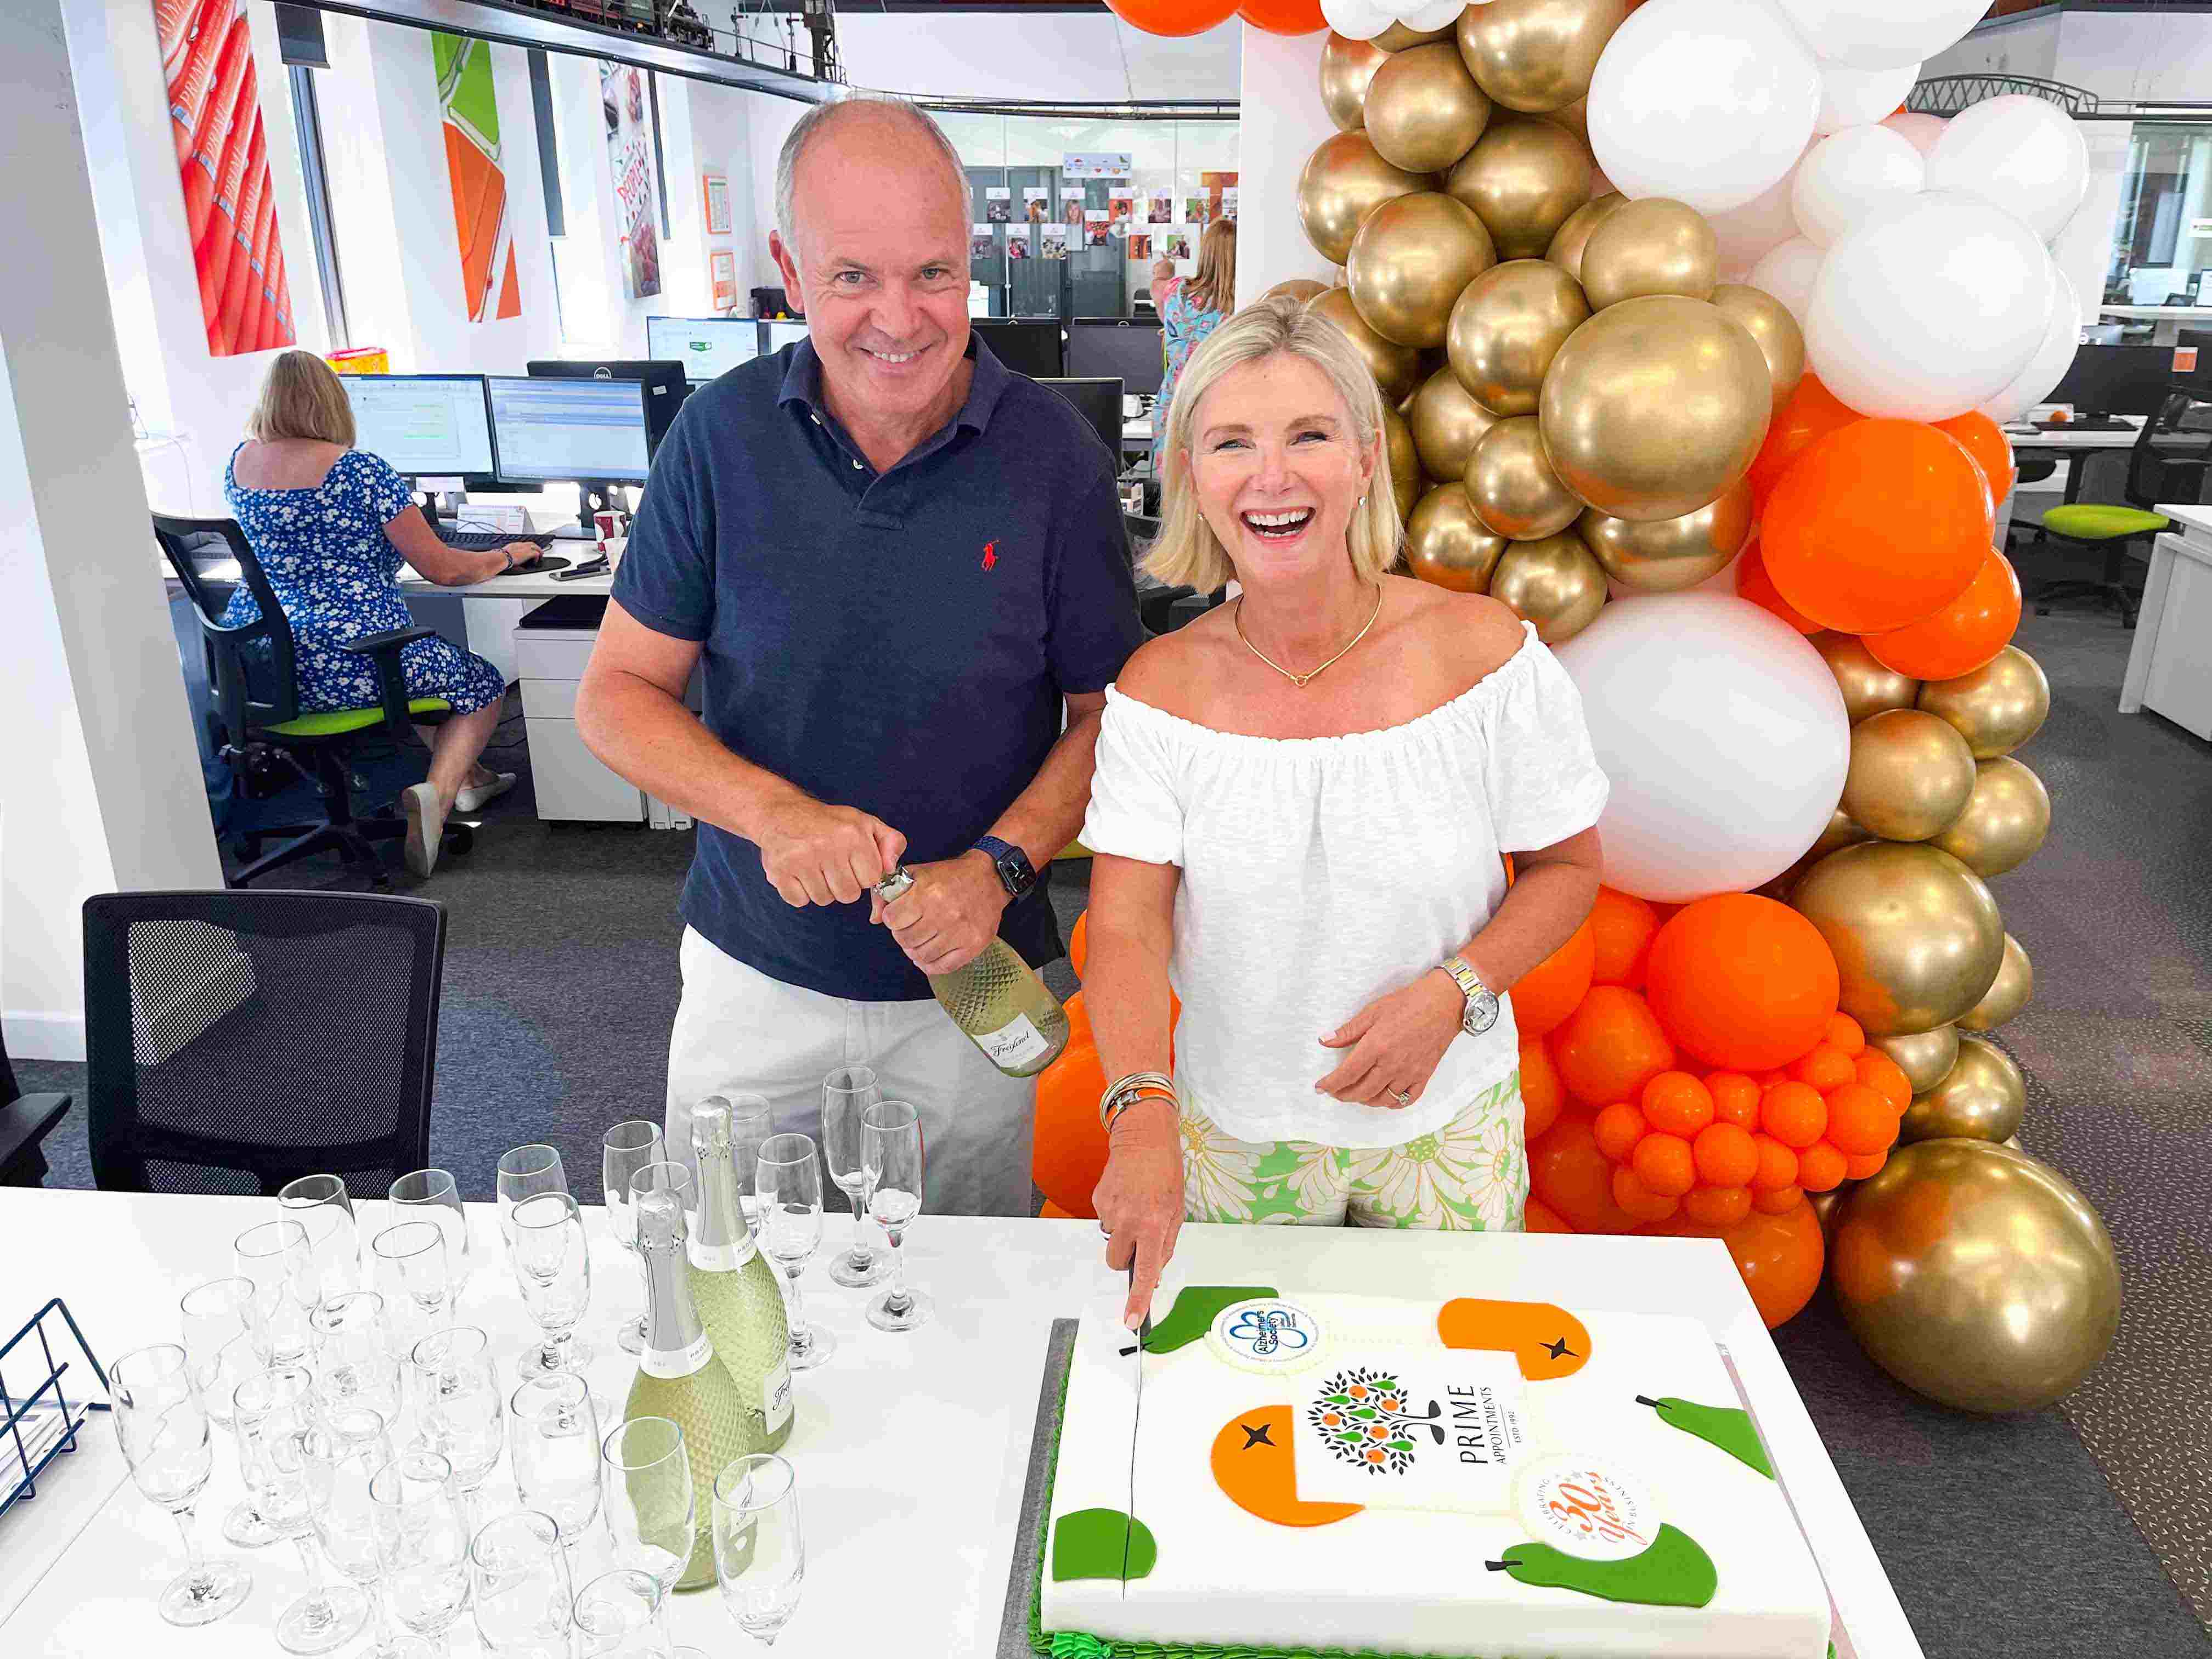 Robyn Holmes, MD & Peter Holmes, Director cutting cake at Prime Appointments, as they celebrate 30 years in business